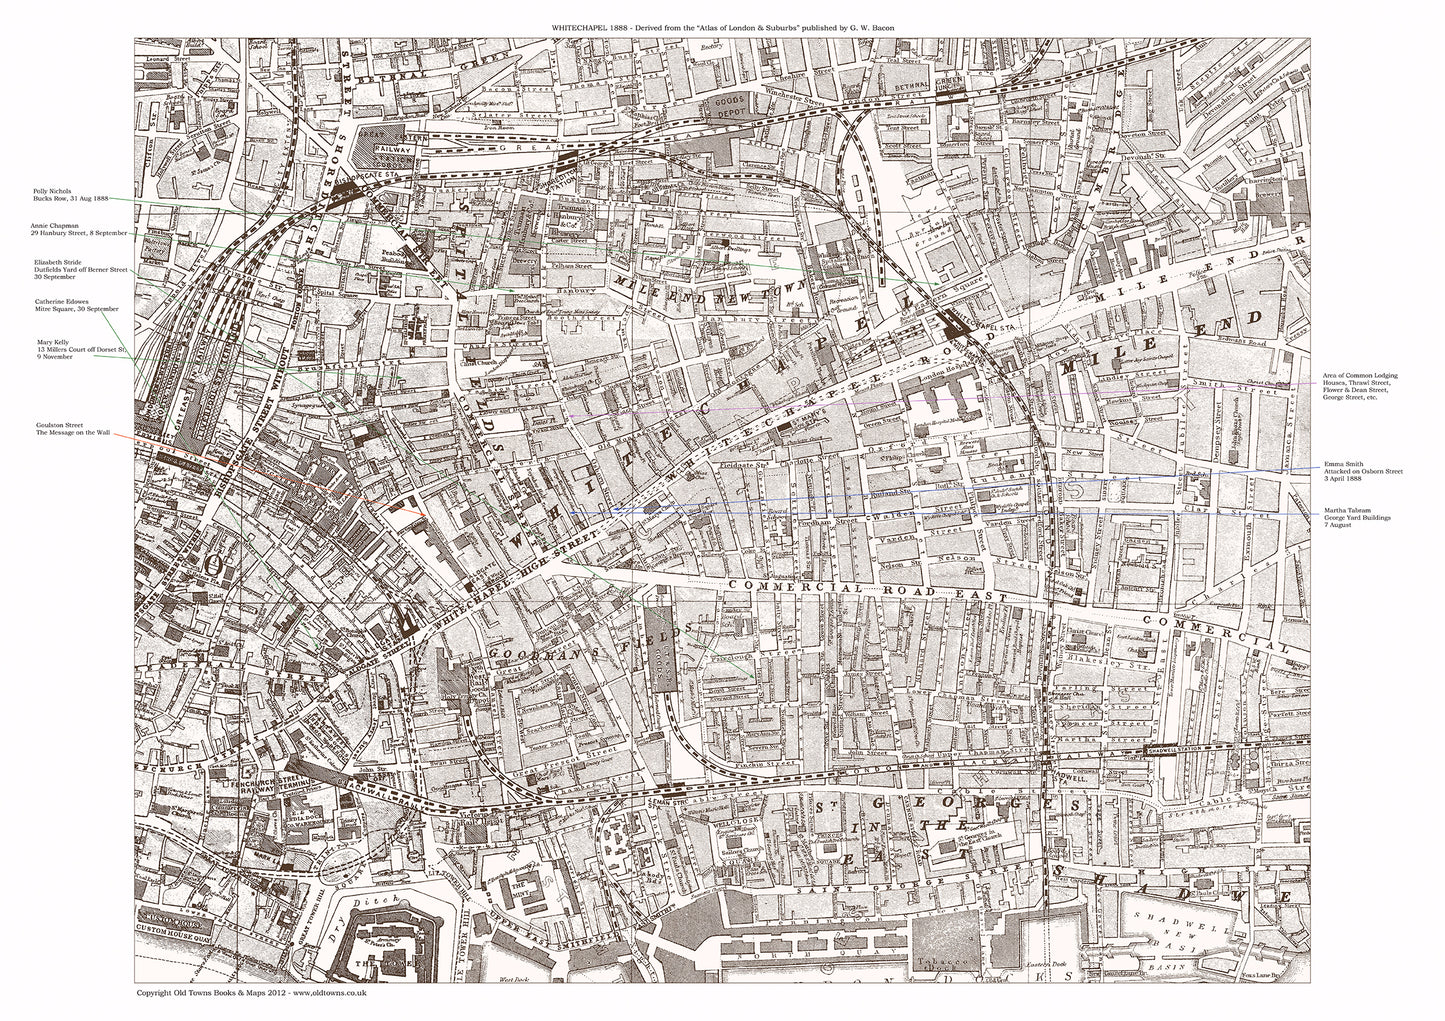 The Jack the Ripper locations map, from original maps dated 1888